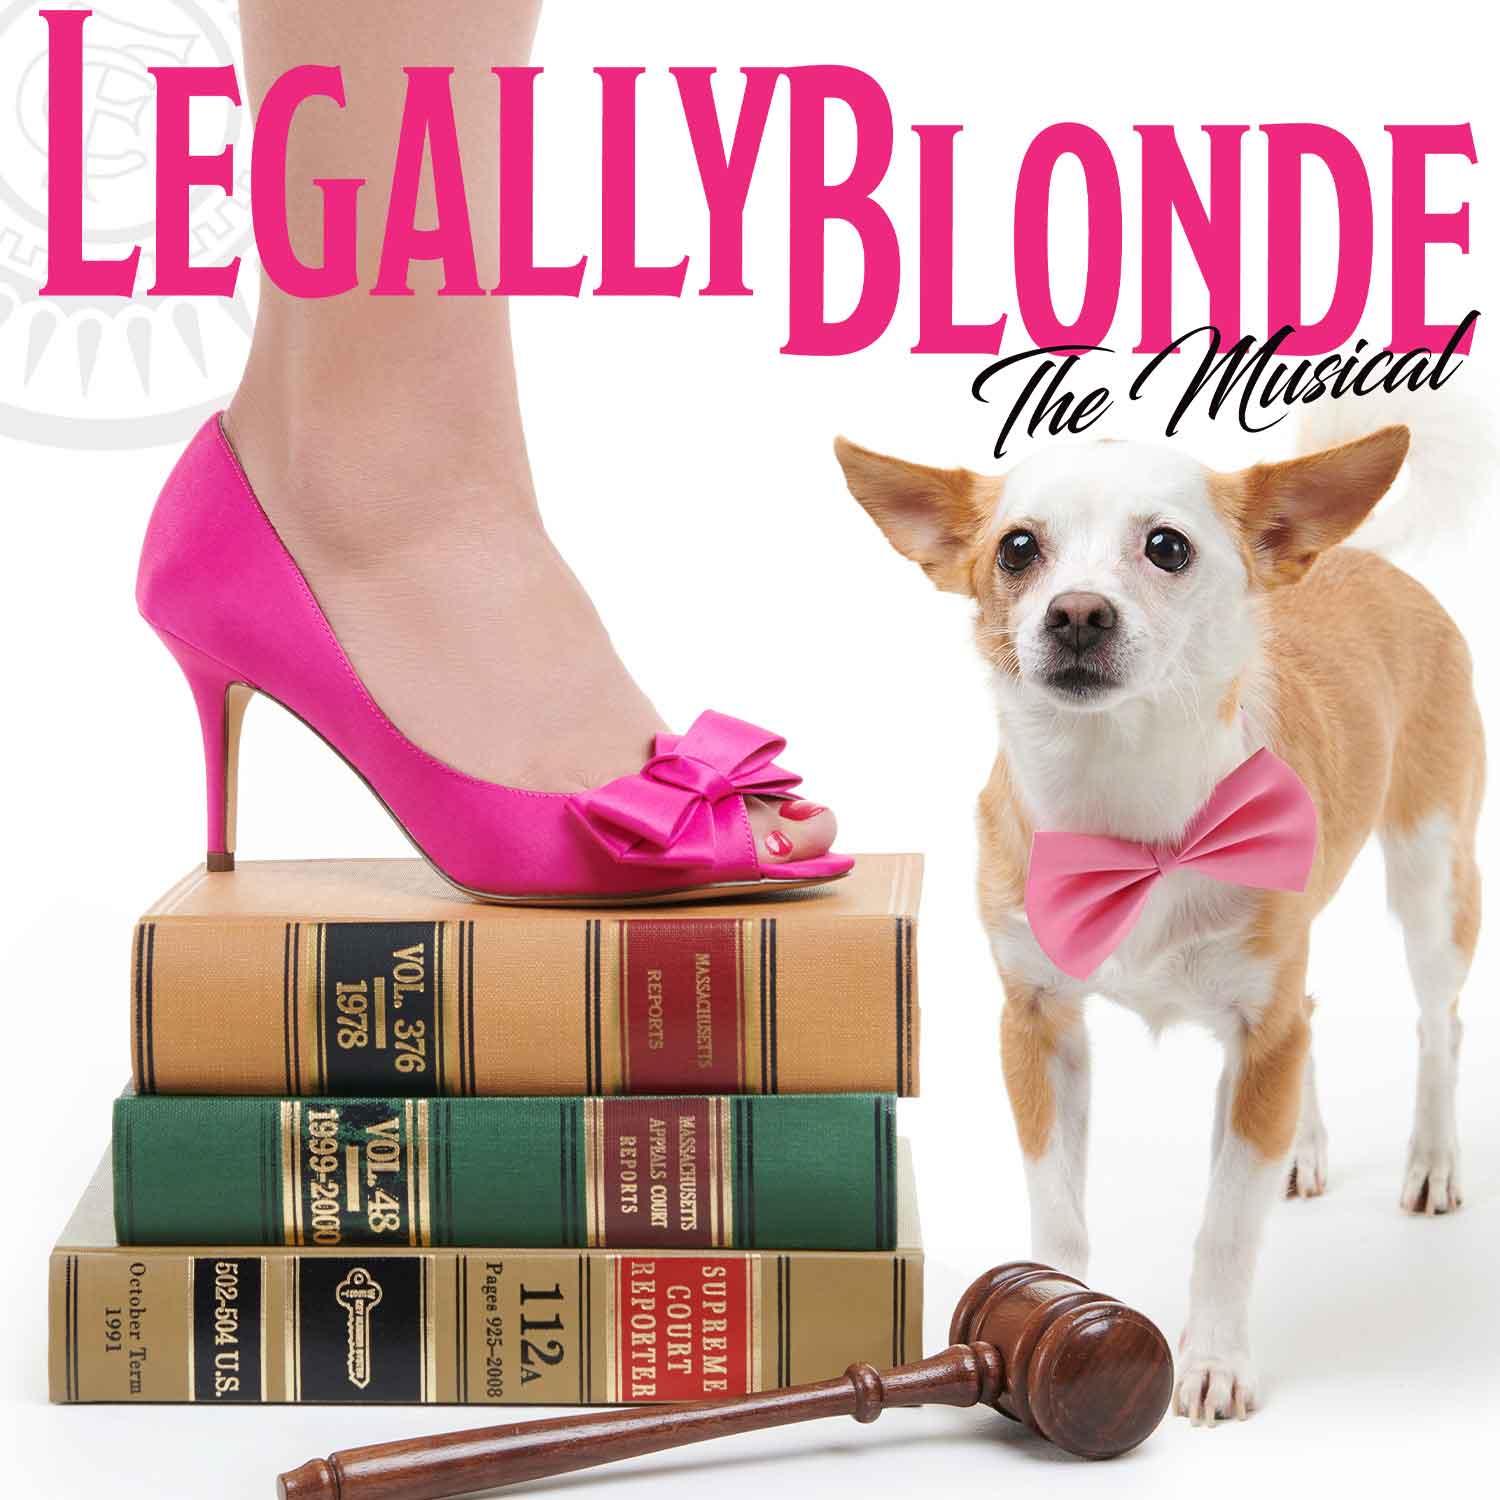 Roxy stars in the Legally Blonde poster, and pratically stole the show!